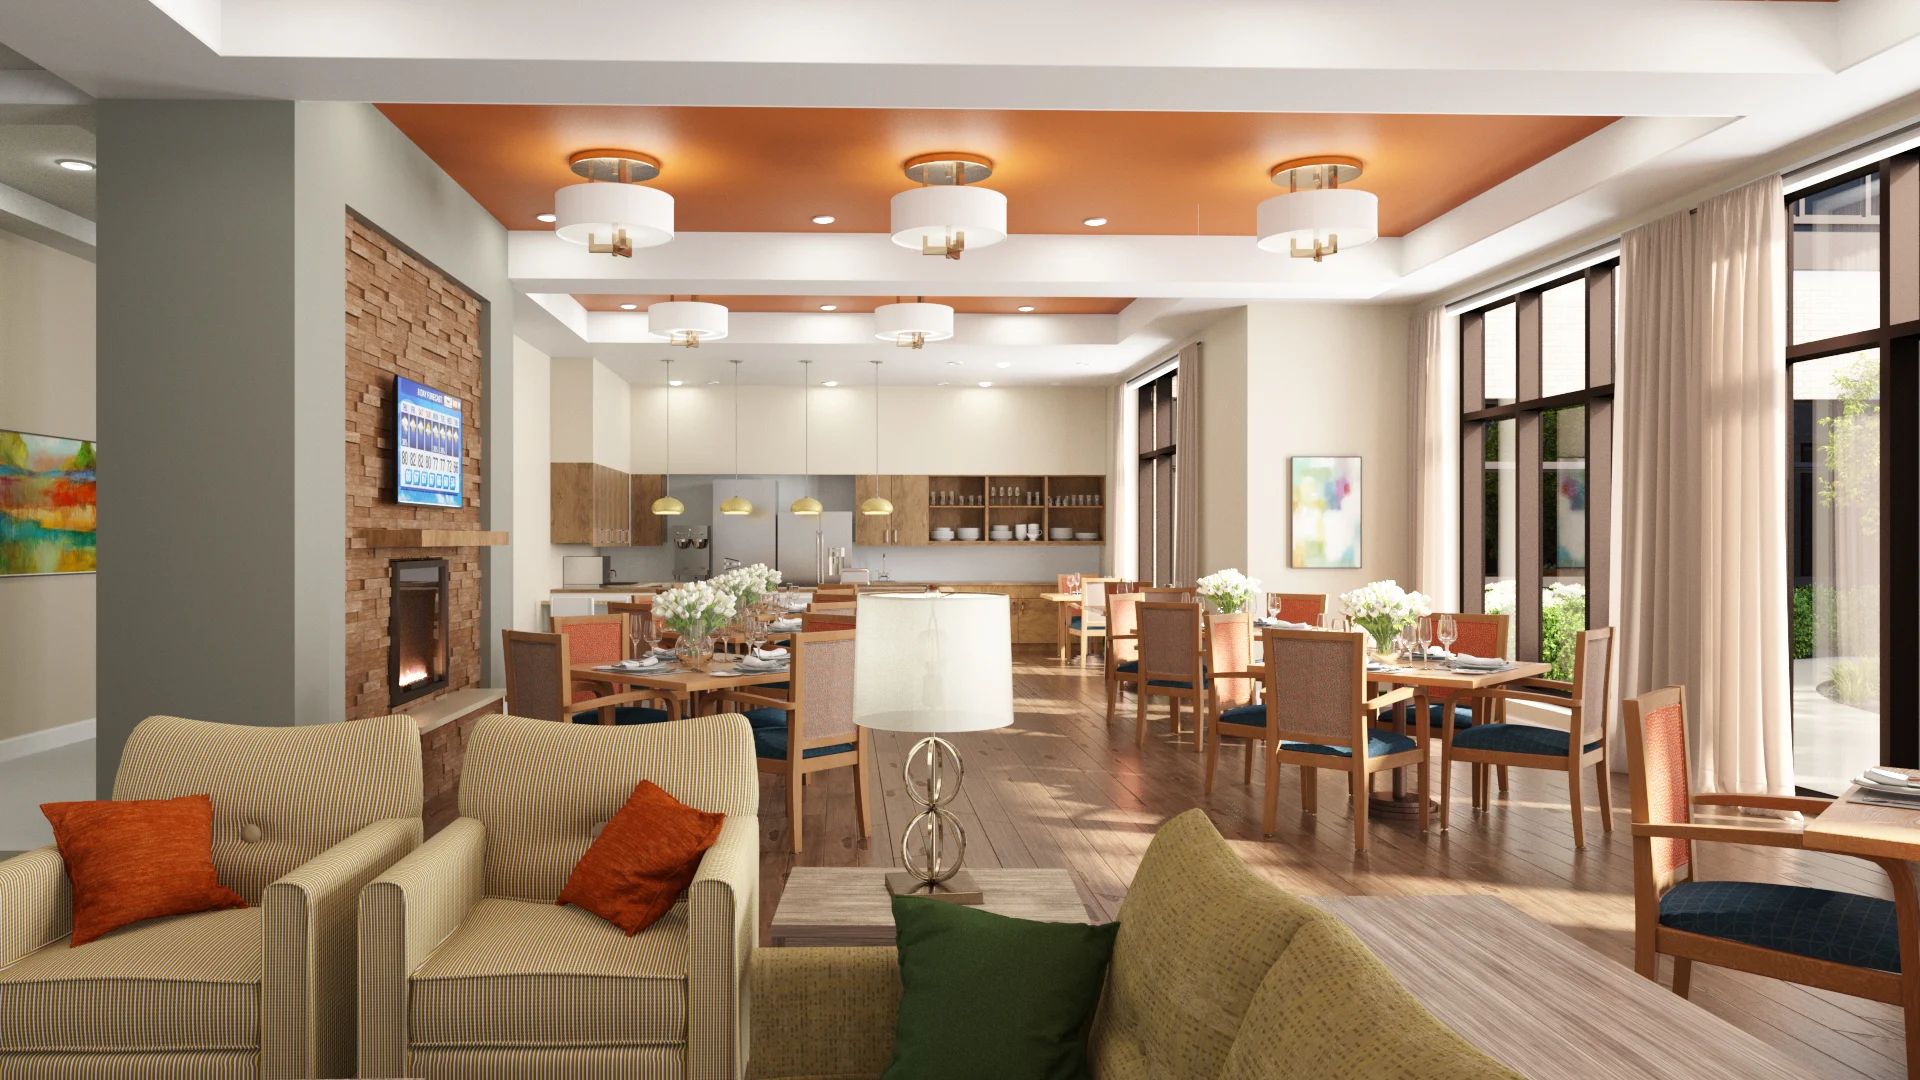 Designing the Ideal Living Space For Seniors: Making an Informed Choice